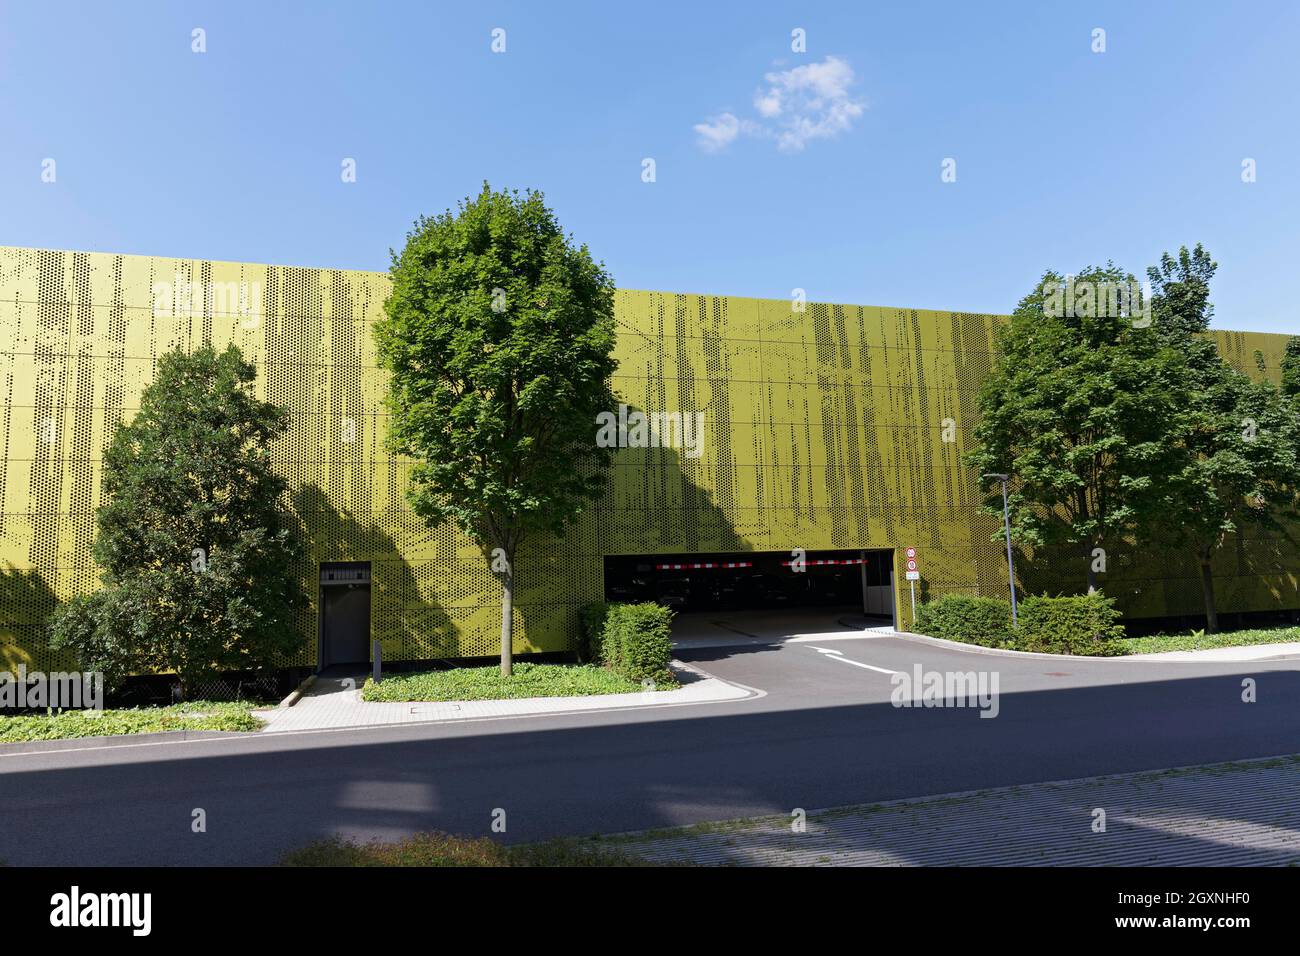 Car park with green facade, green trees in front of it, Muelheim an der Ruhr, Ruhr area, North Rhine-Westphalia, Germany Stock Photo